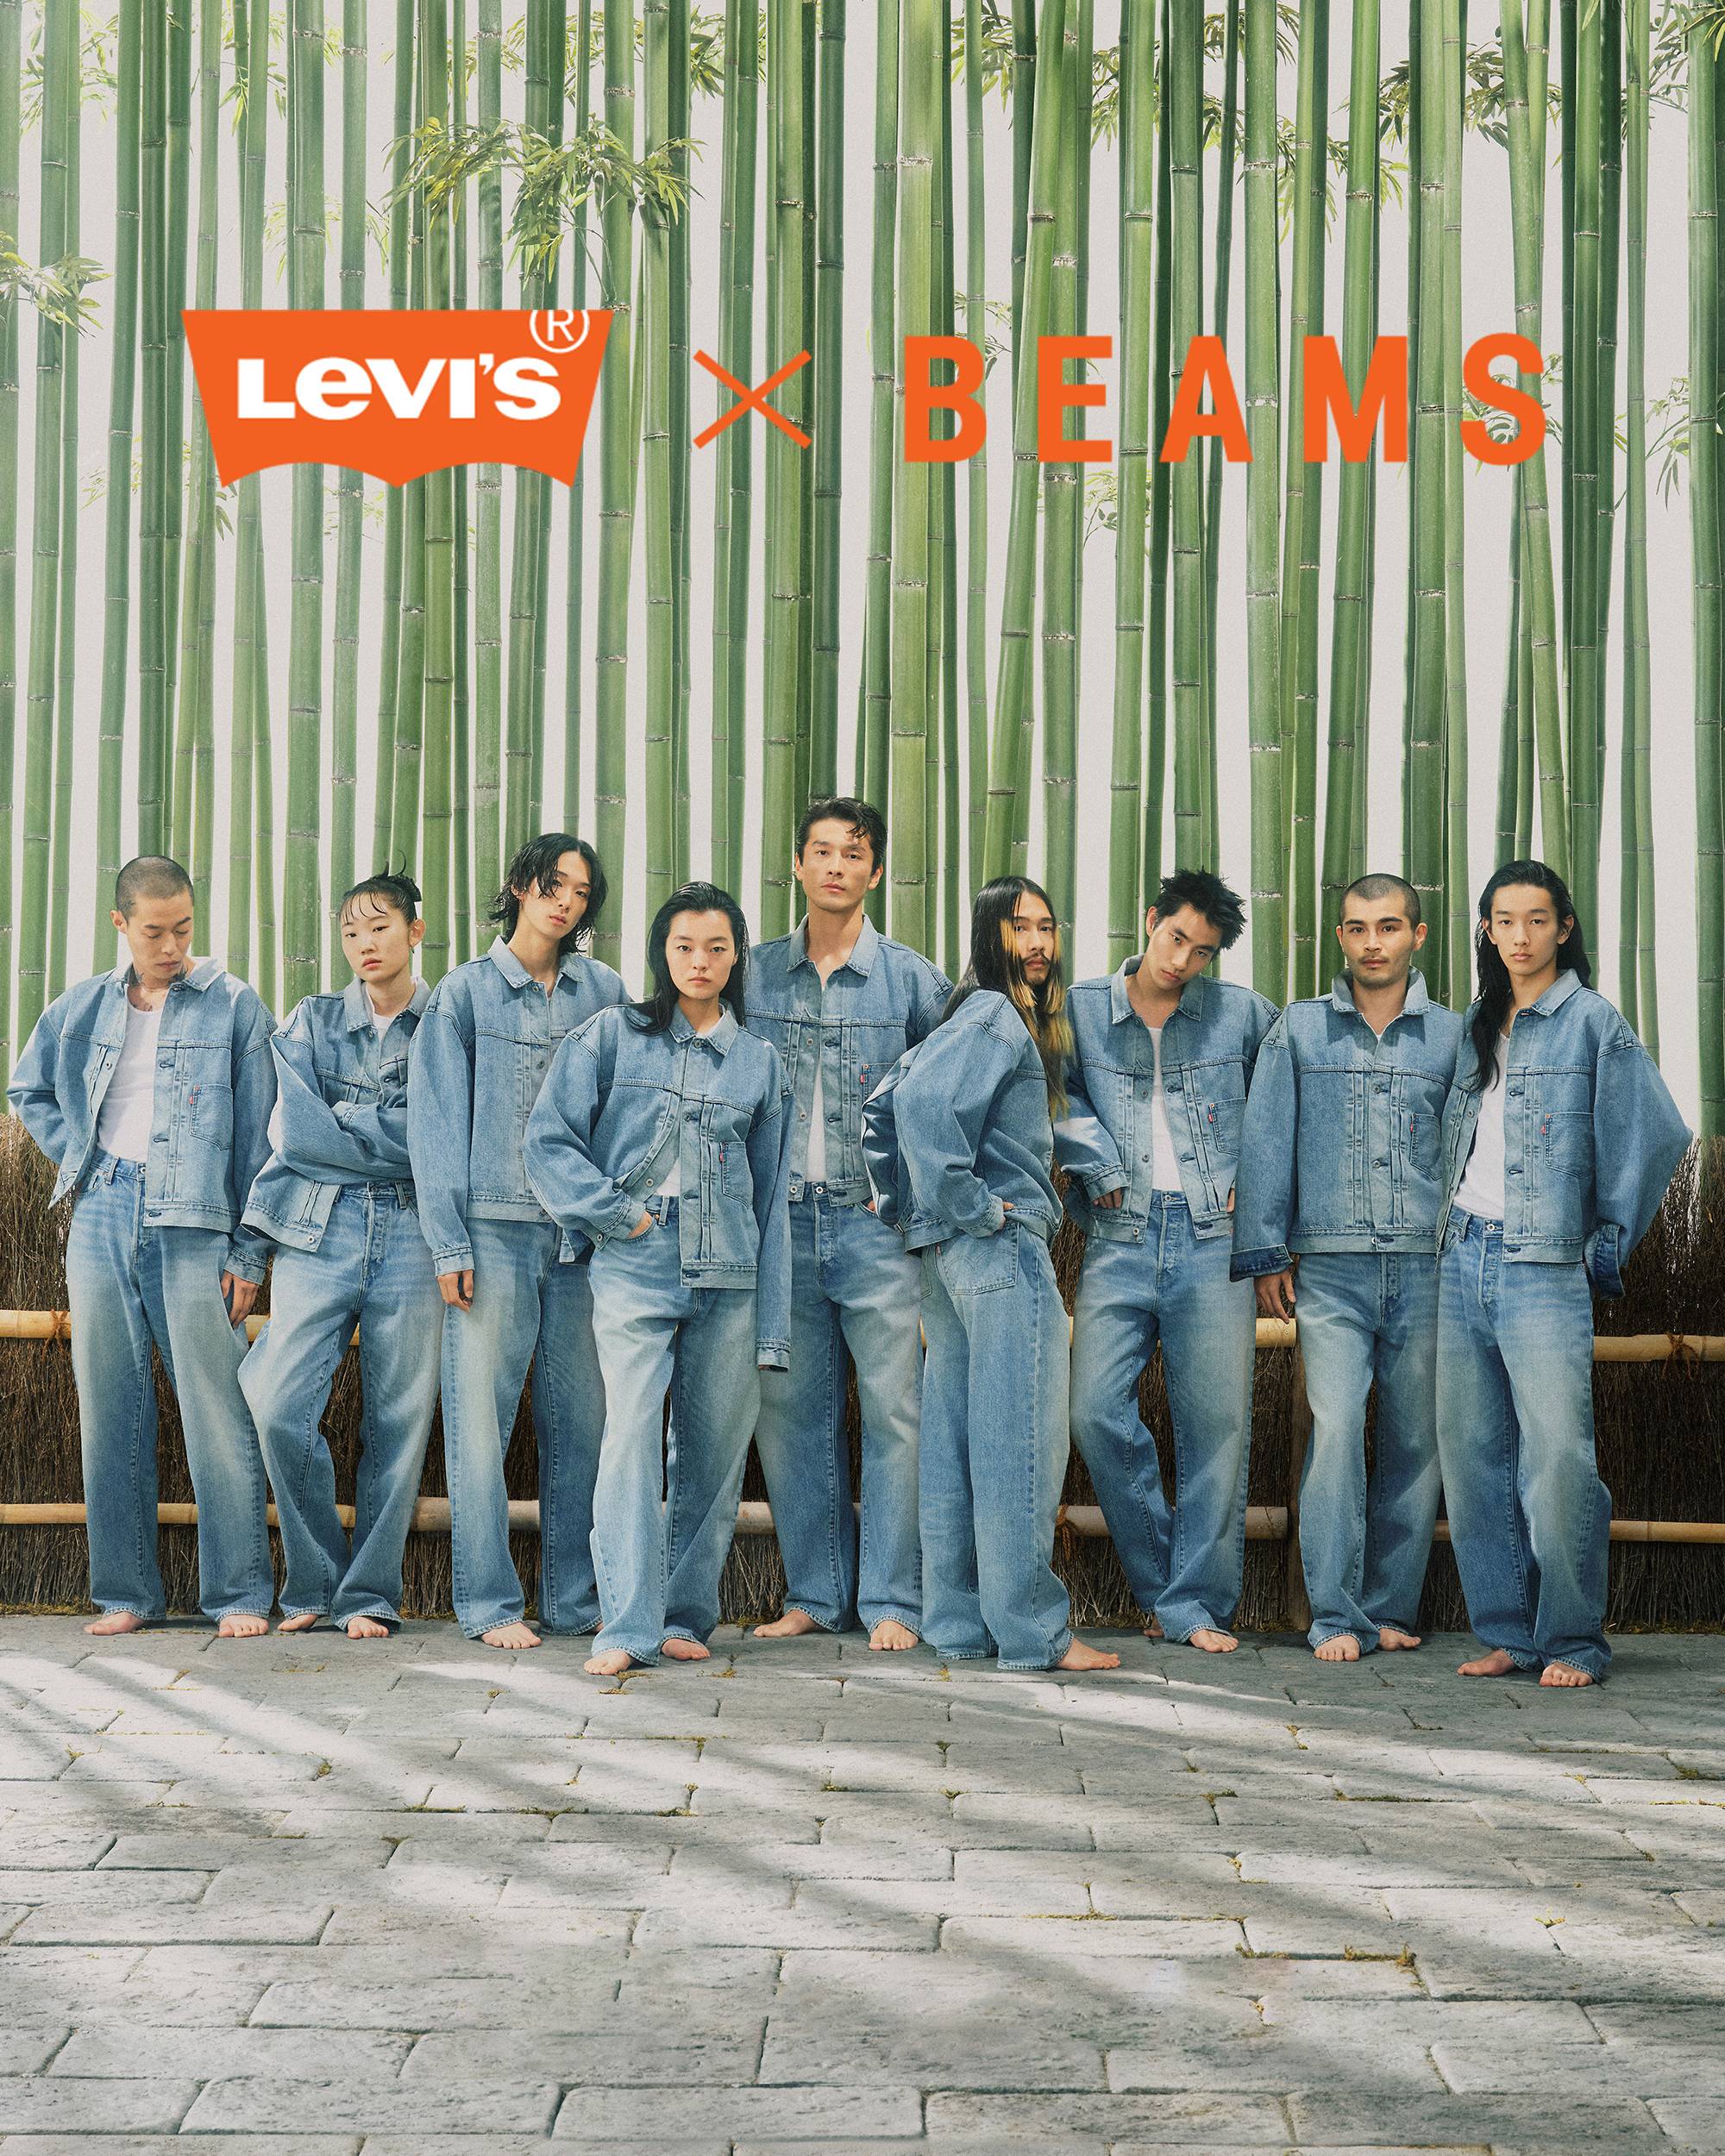 Levi’s x BEAMS collection